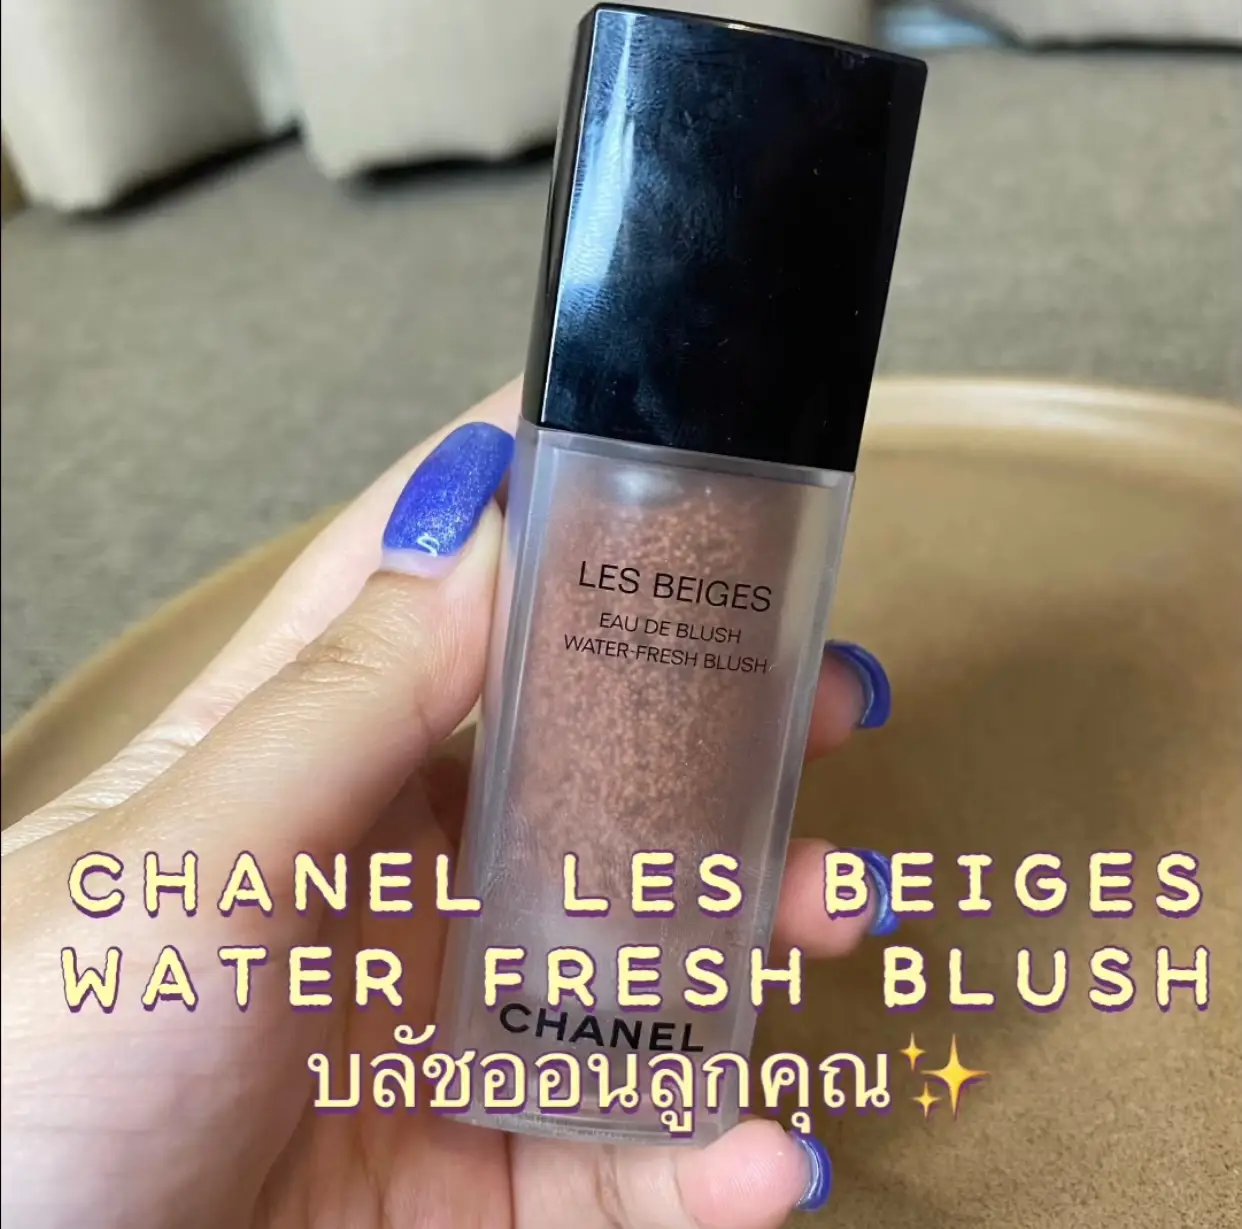 Chanel les beiges water fresh blush, Gallery posted by primpm